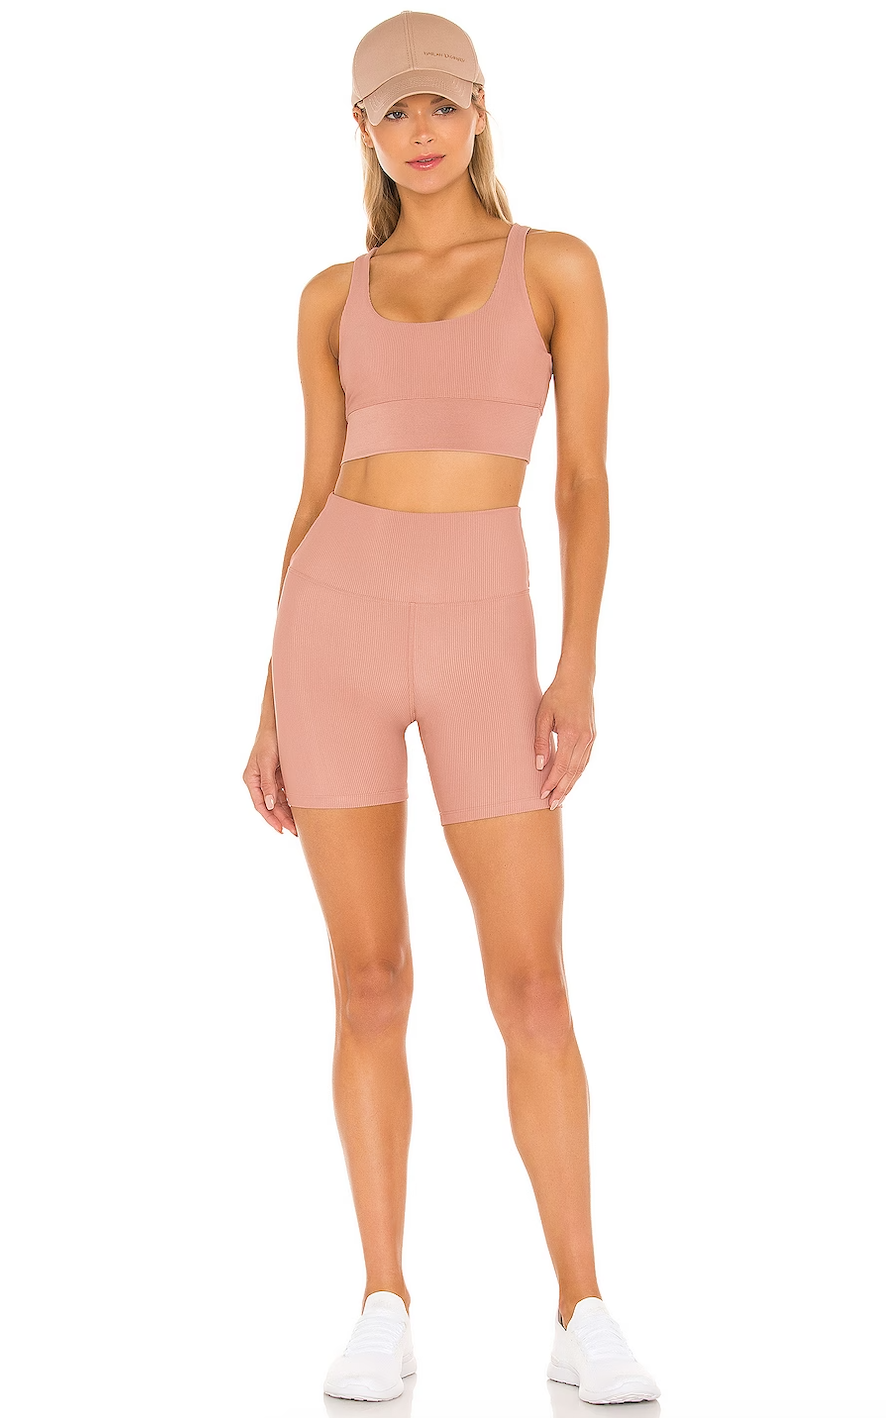 Fit, Fabulous, and Fashionable: How Cute Workout Outfits Empower Your Fitness Journey